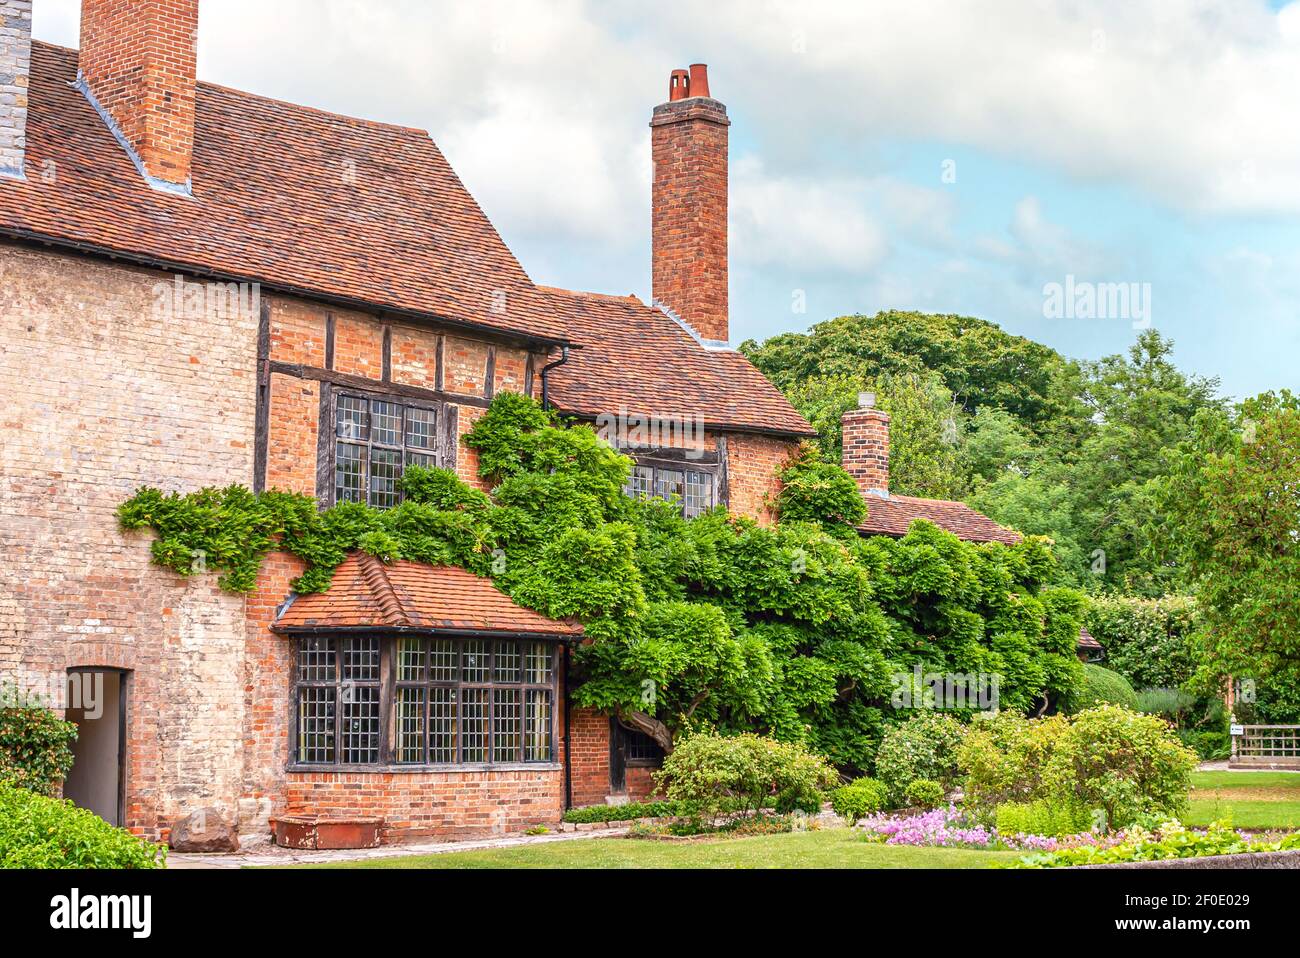 Nash's House and New Place in Stratford upon Avon, Warwickshire, England. Stockfoto